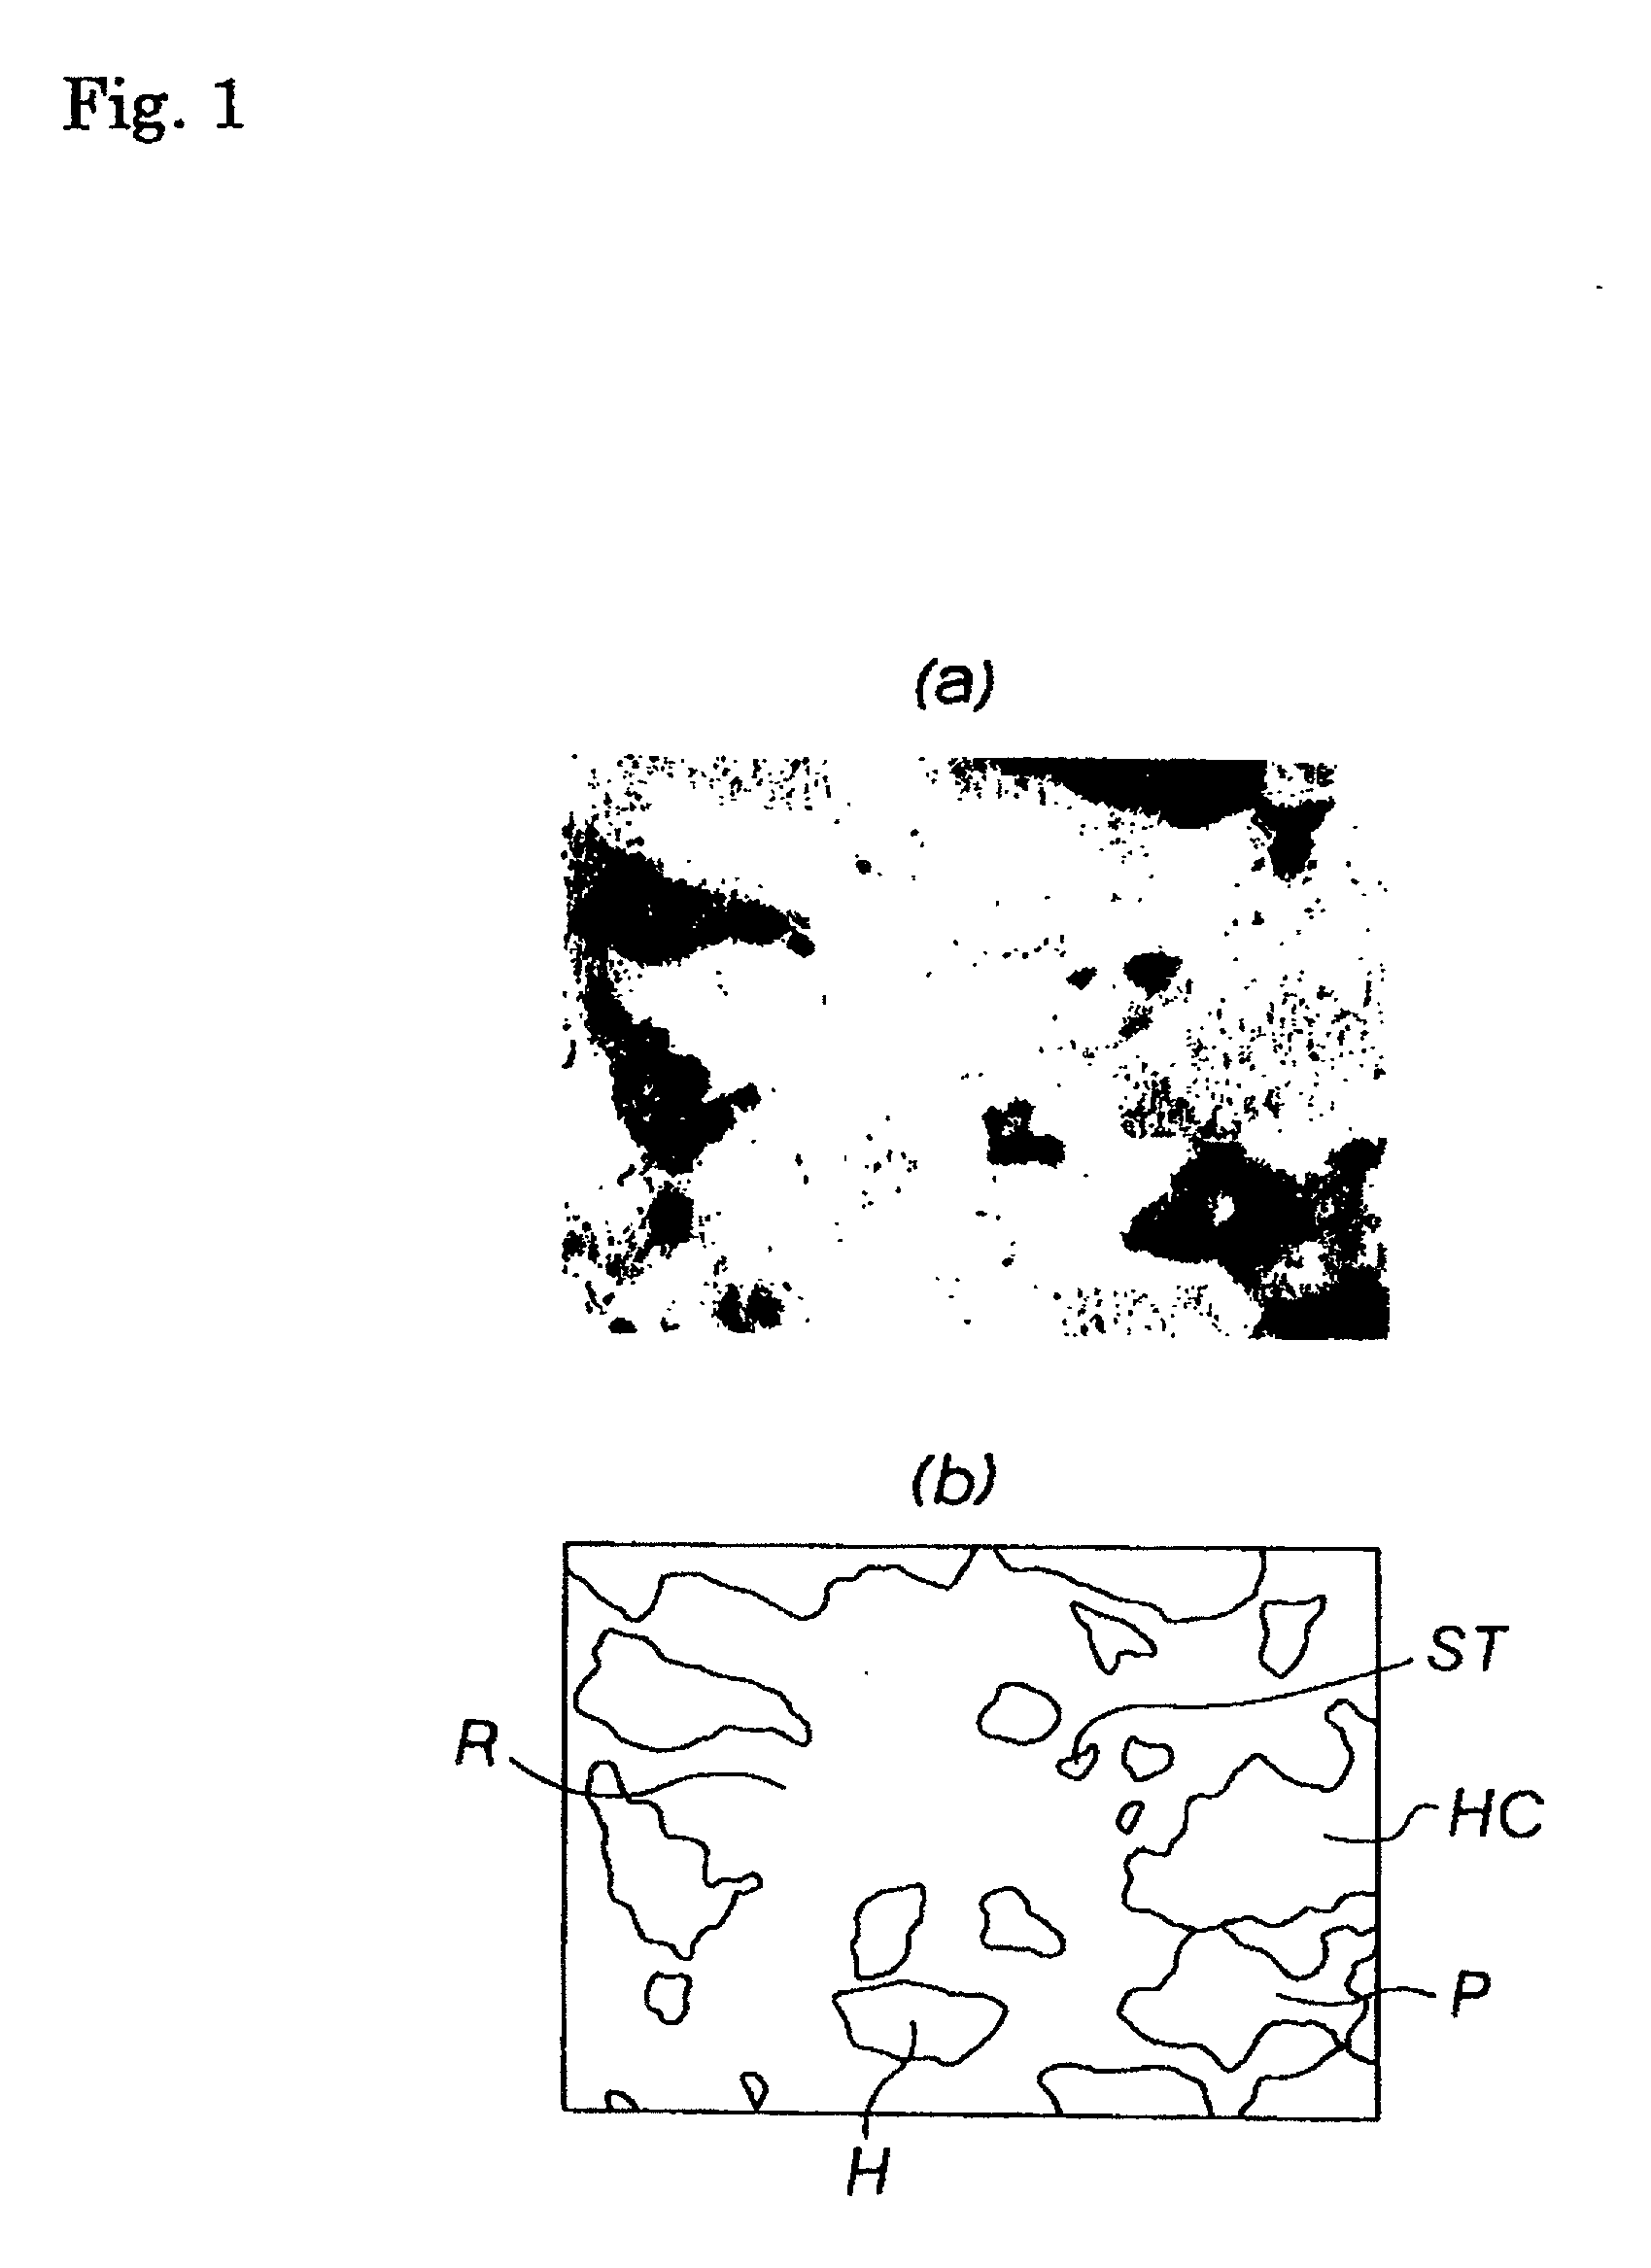 Iron-based sintered alloy material for valve seat and valve seat made of iron-based sintered alloy